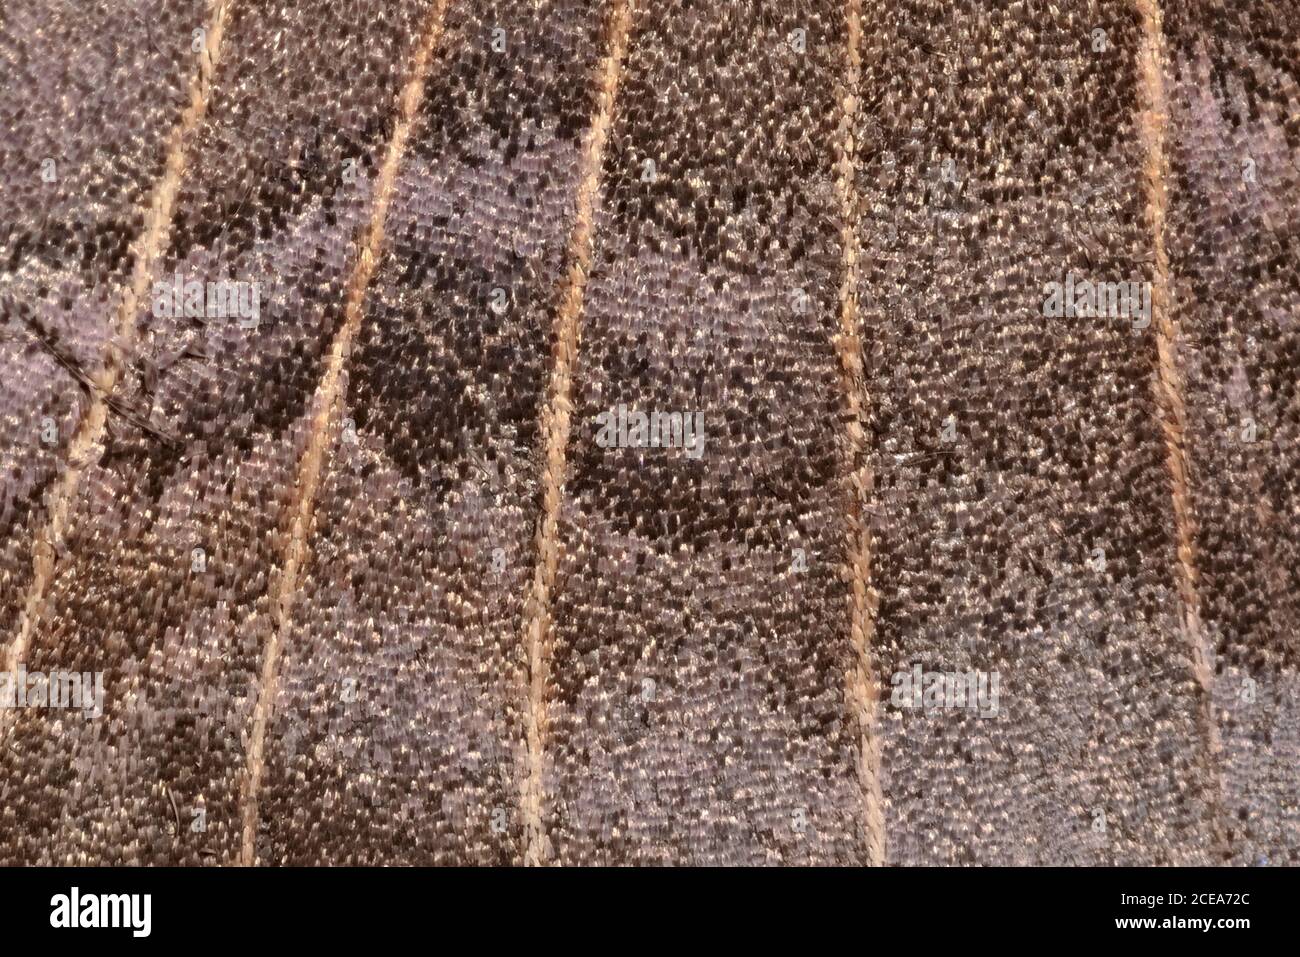 2 - Background poplar hawk moth wing abstract texture. Scintillating shiny wing scale textures and venation. Super macro close up image. Stock Photo